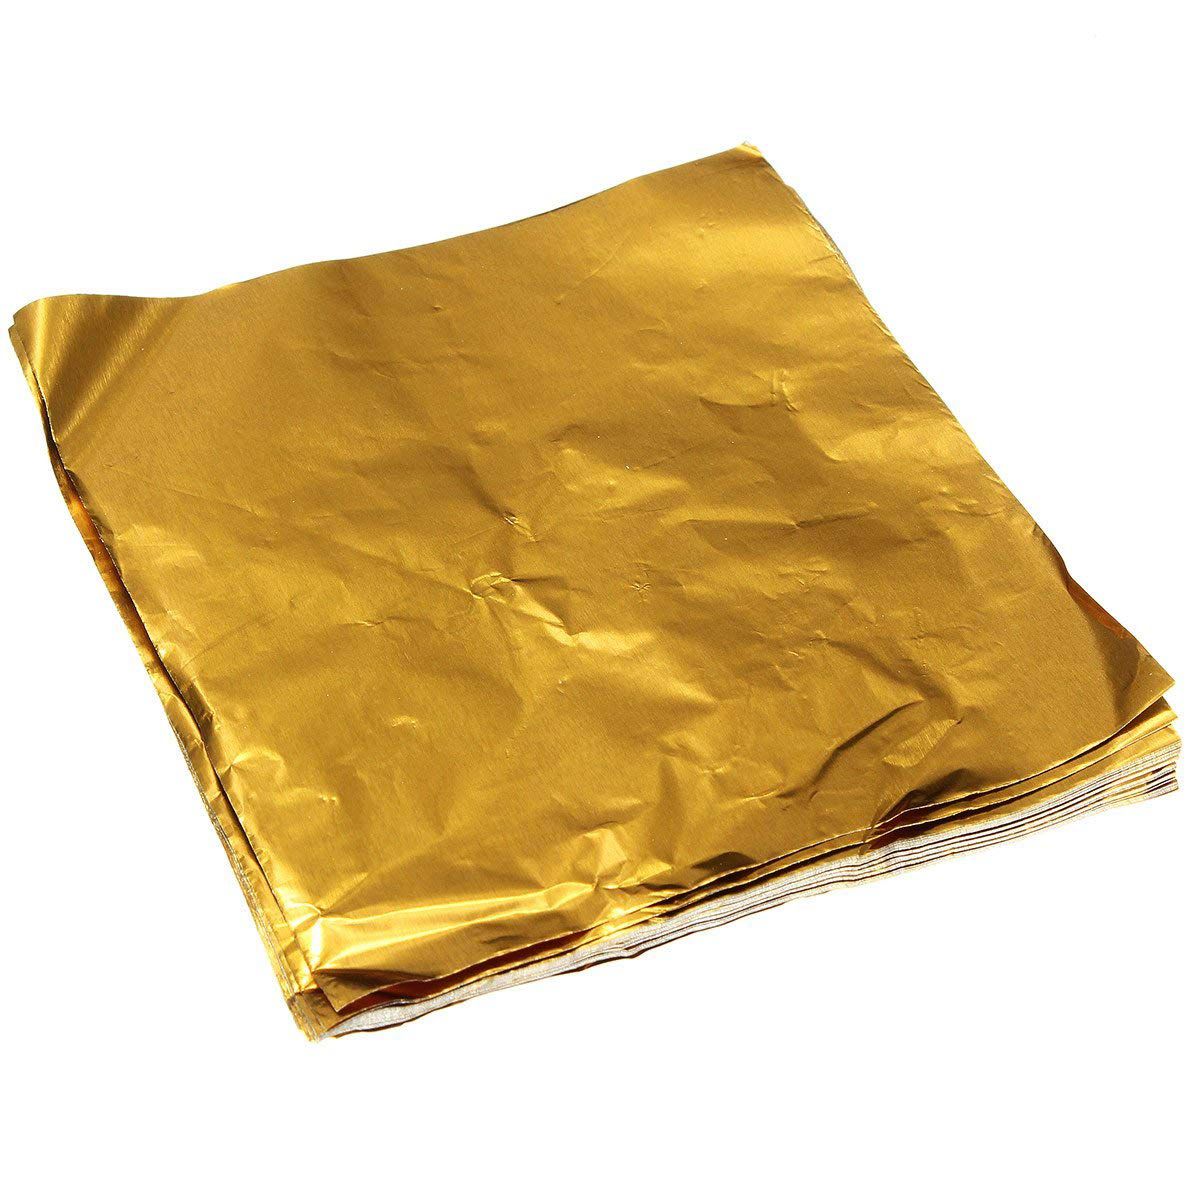 Perfect Pricee Aluminum Chocolate Wrapper Foil Chocolate Candy